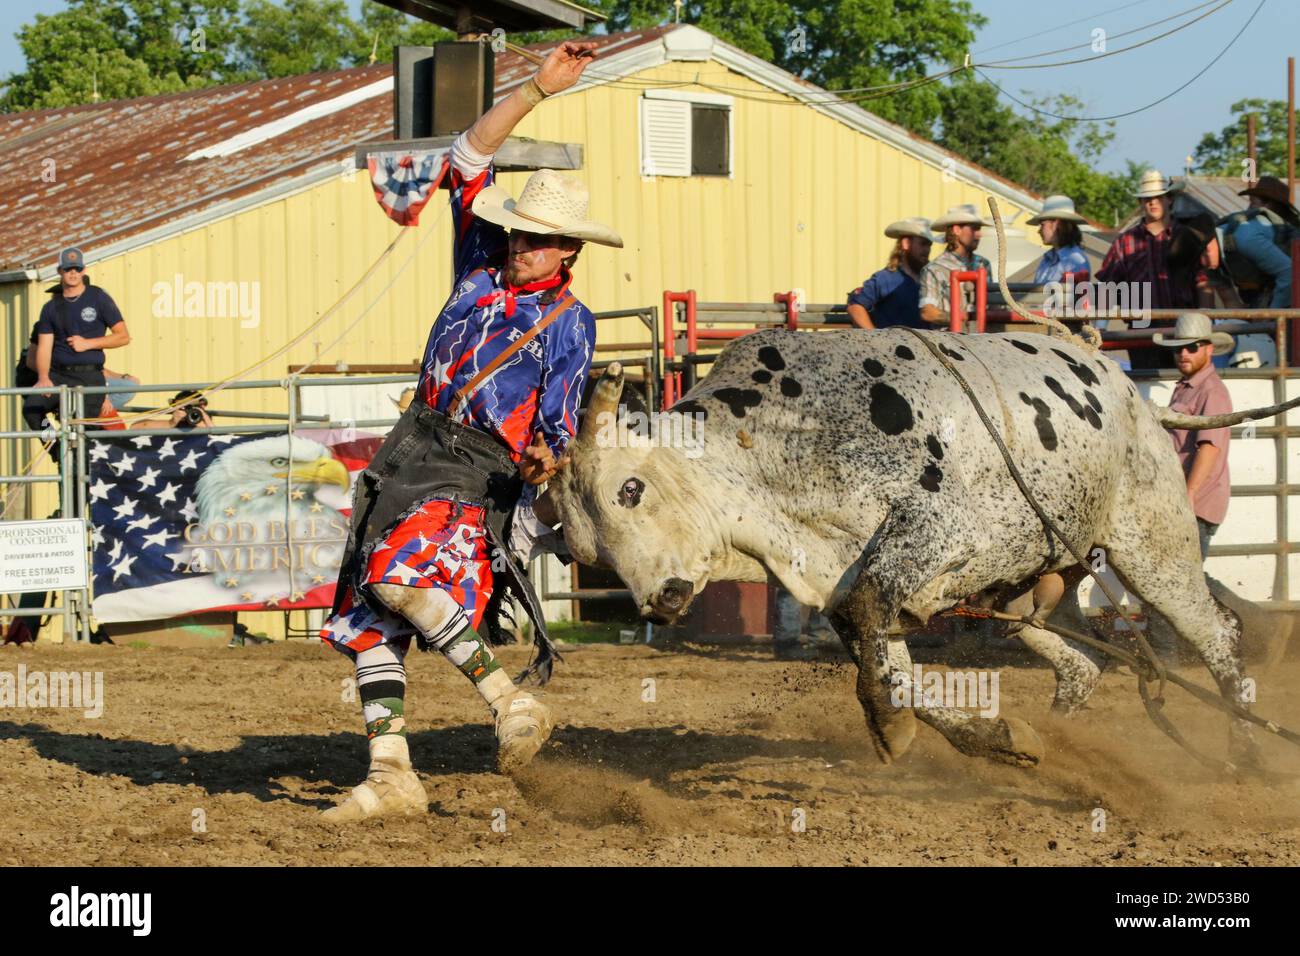 The bull catches the rodeo clown. Small town weekly Bull Riding as a sport. Fox Hollow Rodeo. Waynesville, Dayton, Ohio, USA. Stock Photo